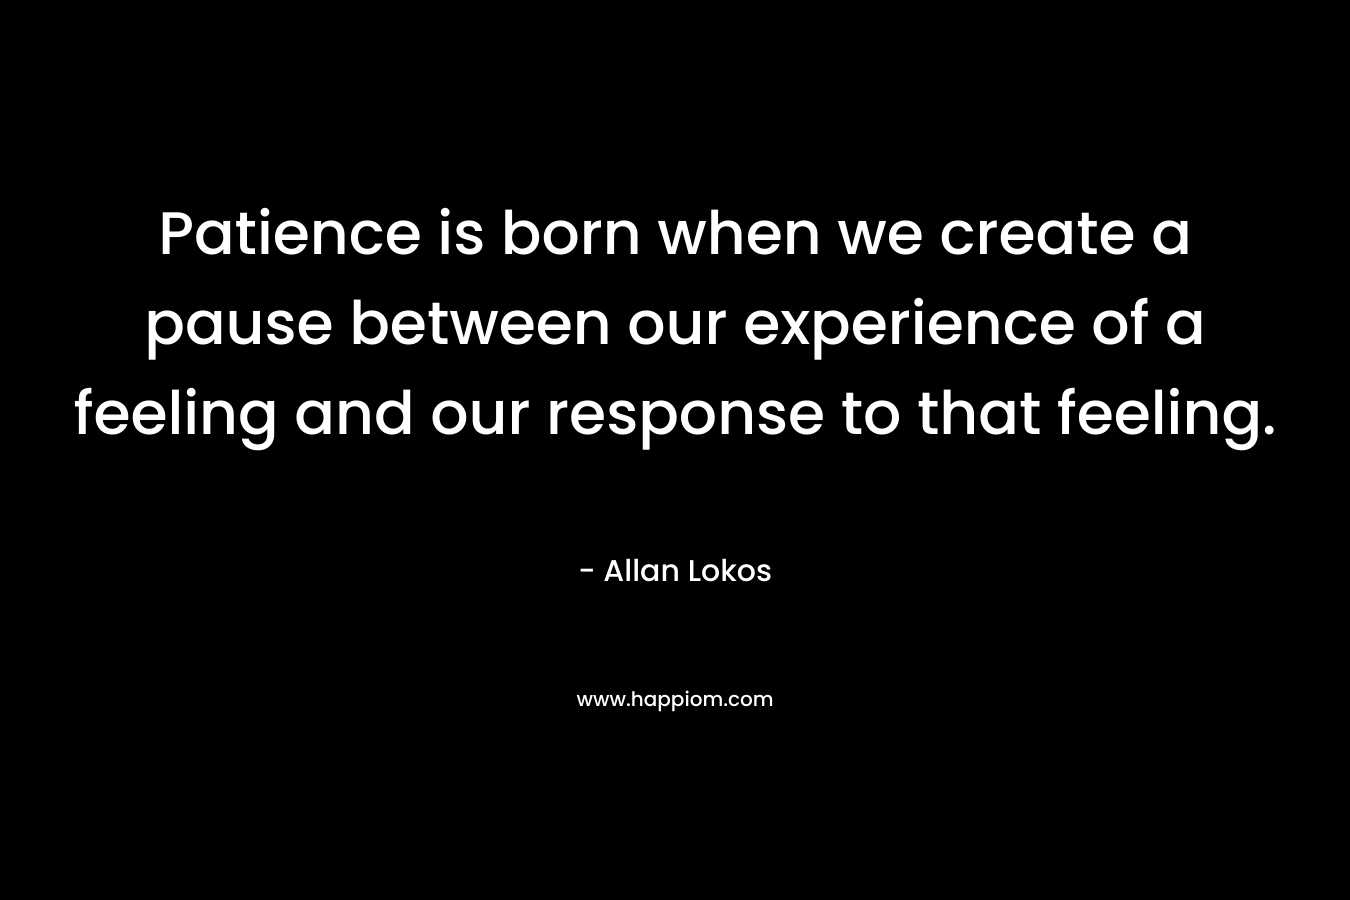 Patience is born when we create a pause between our experience of a feeling and our response to that feeling. – Allan Lokos